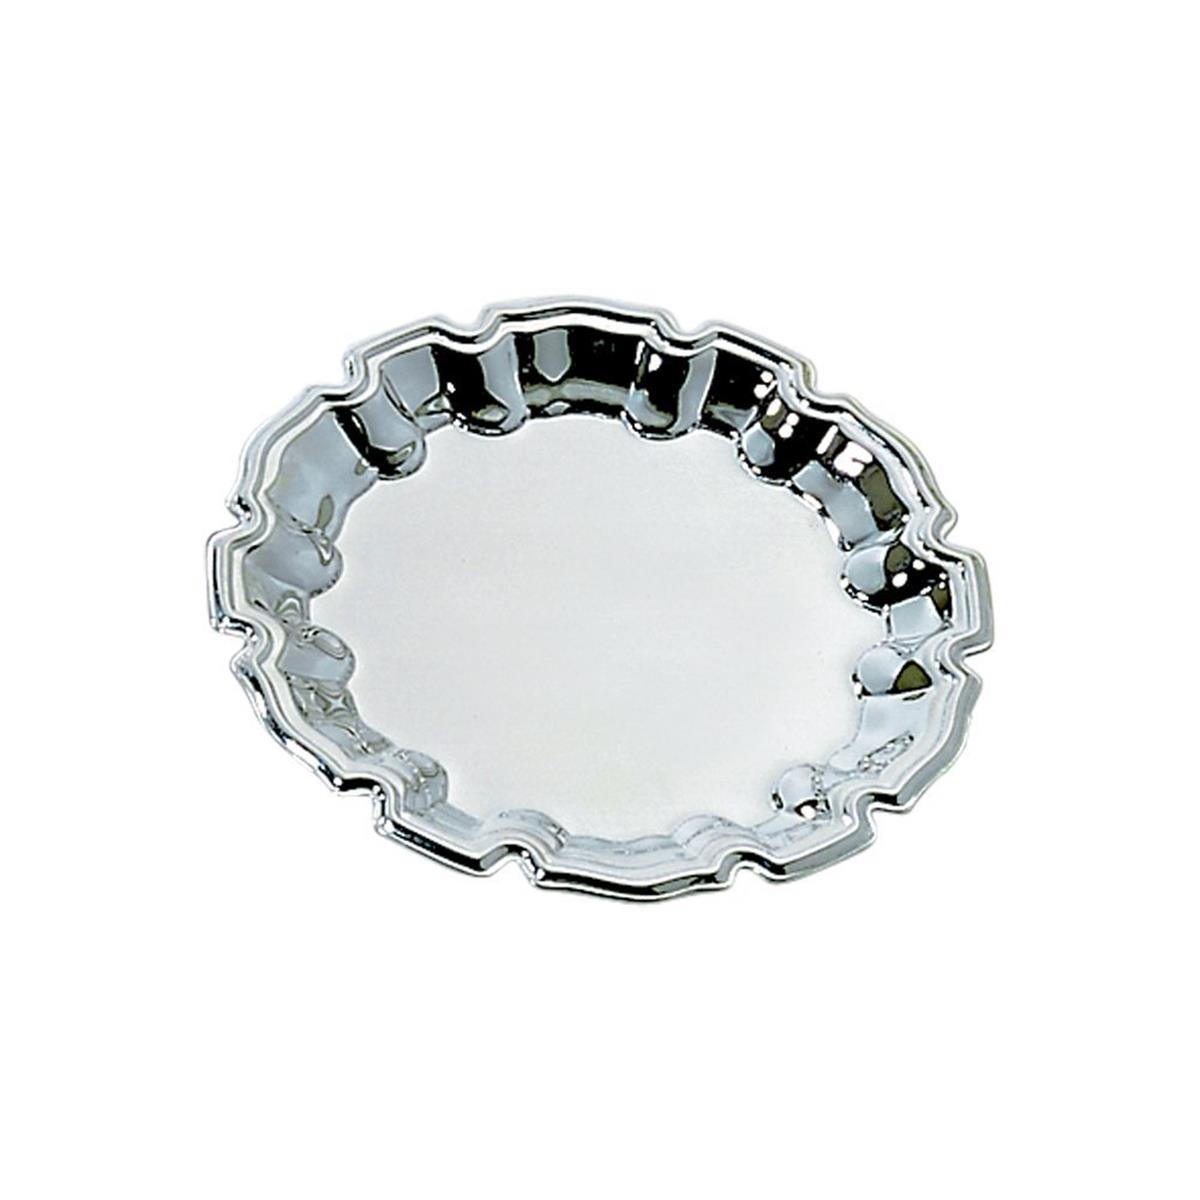 025103 10 In. Stainless Steel Chippendale Tray